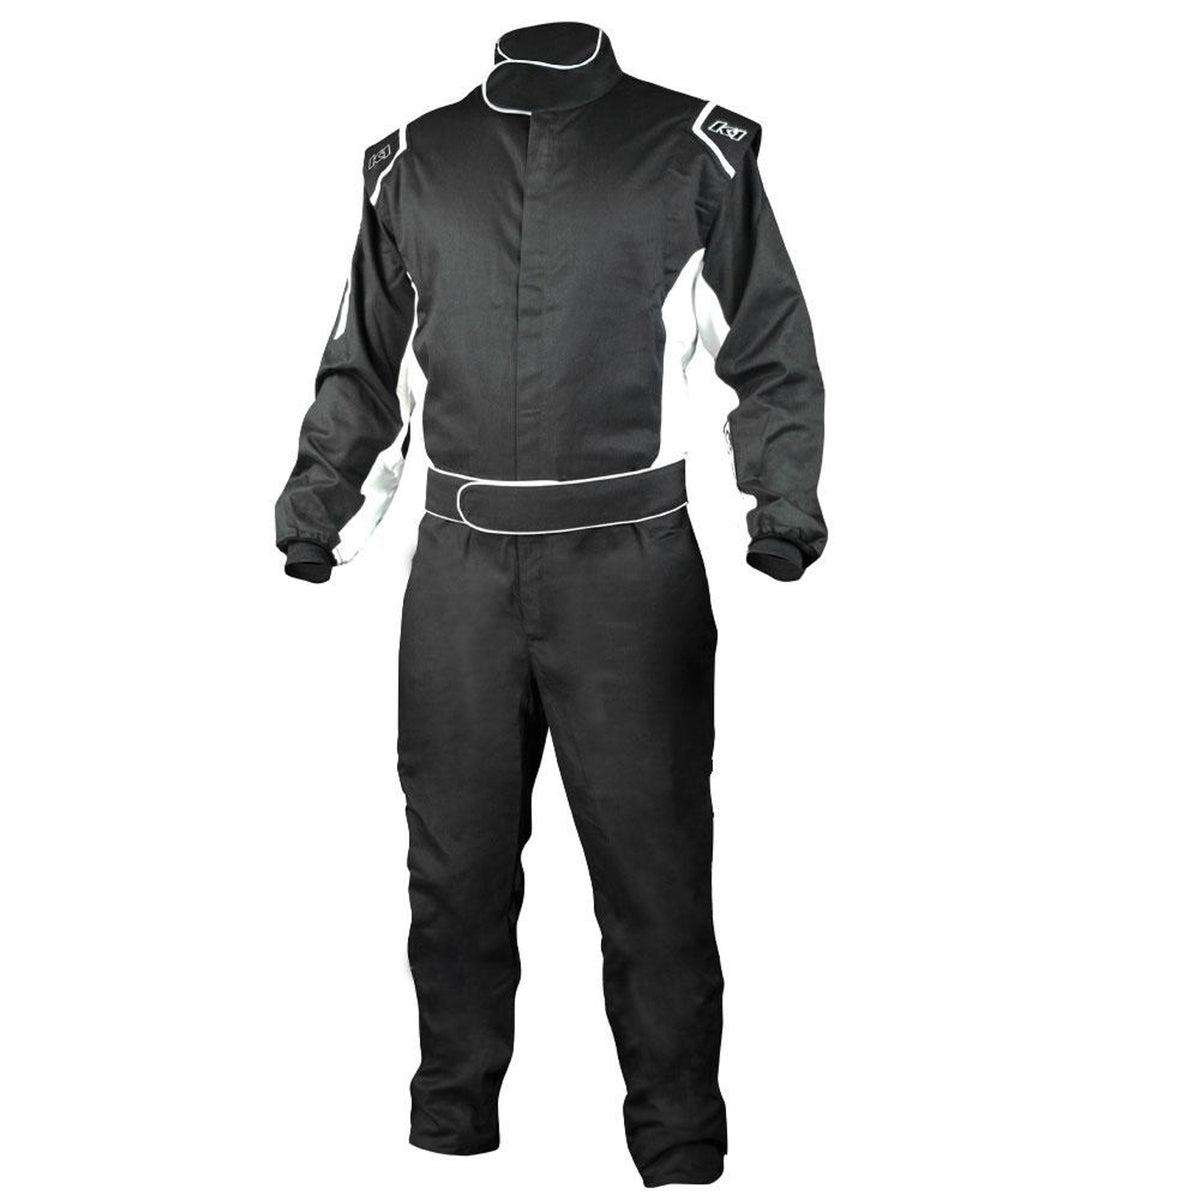 Suit Challenger Black XX-Small SFI 3.2A/1